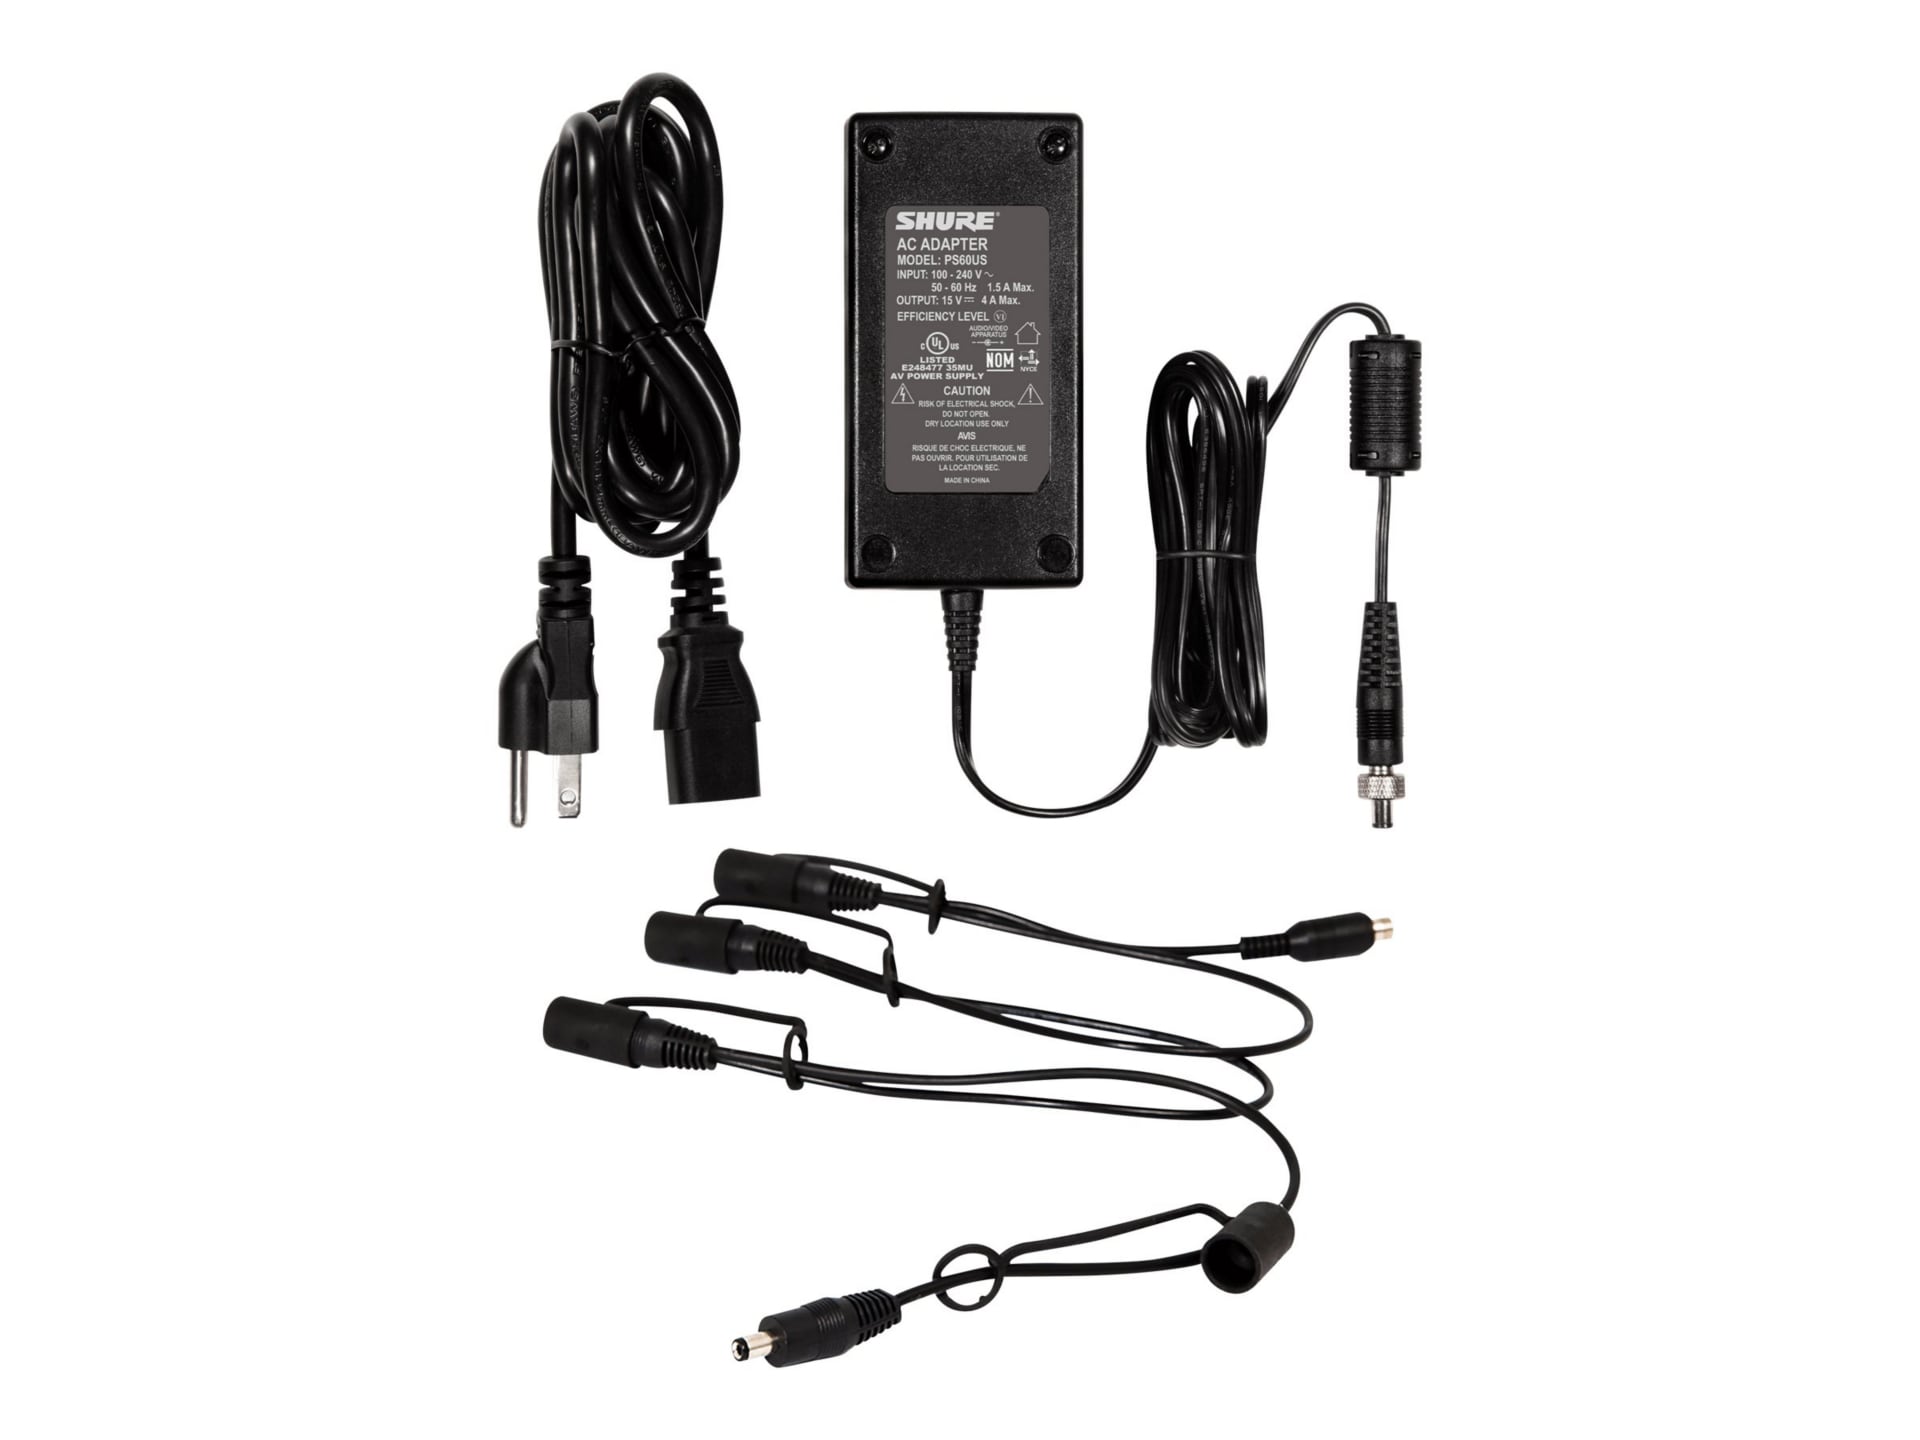 Shure PS124 power supply - DC jack